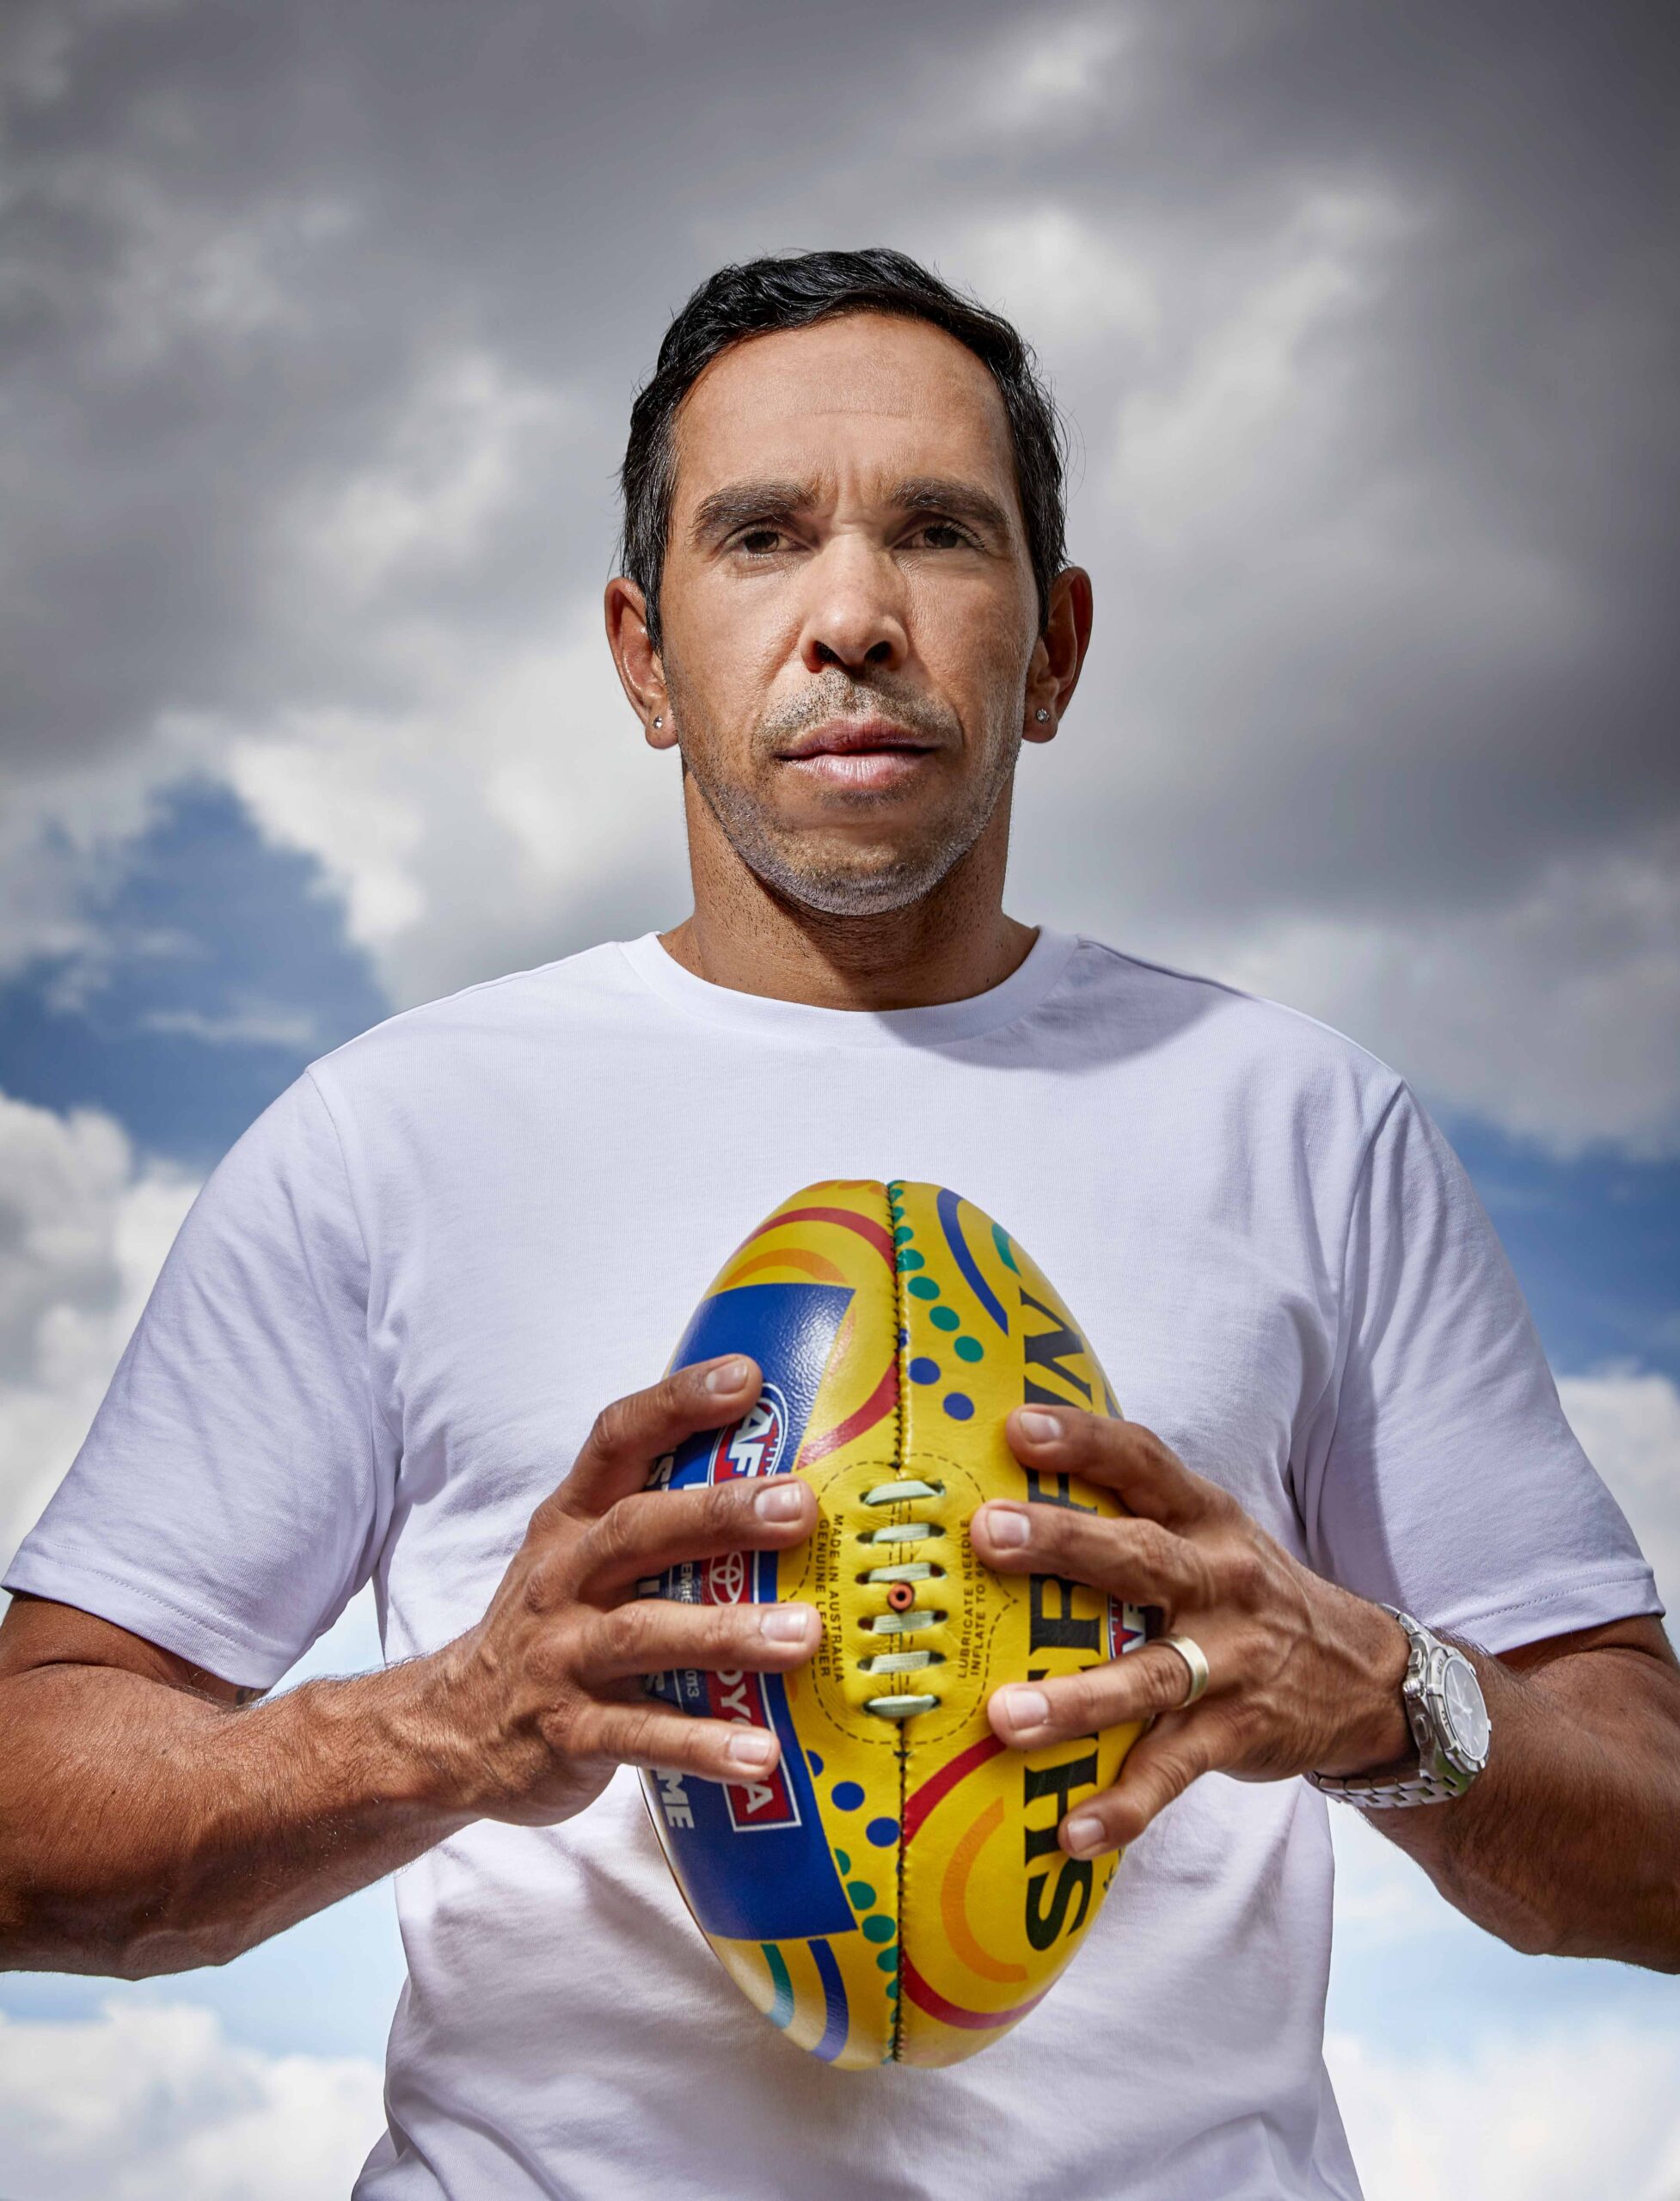 Footballer Eddie Betts holds a football and looks down at the camera 